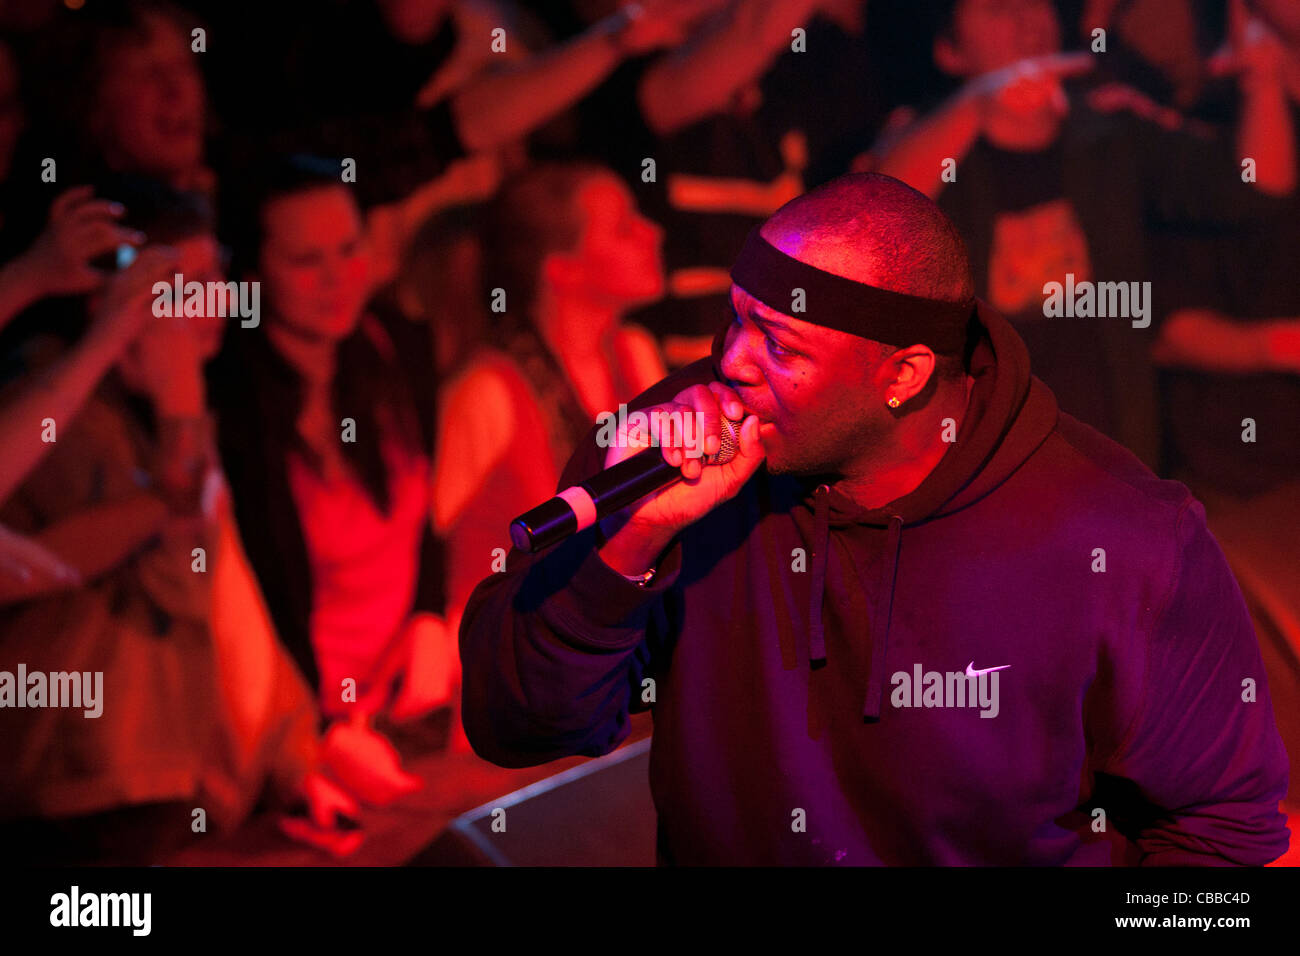 American hip hop band EPMD performs live in Prague on February 22, 2011. Erick Sermon pictured. (CTK Photo/Krystof Kriz) Stock Photo